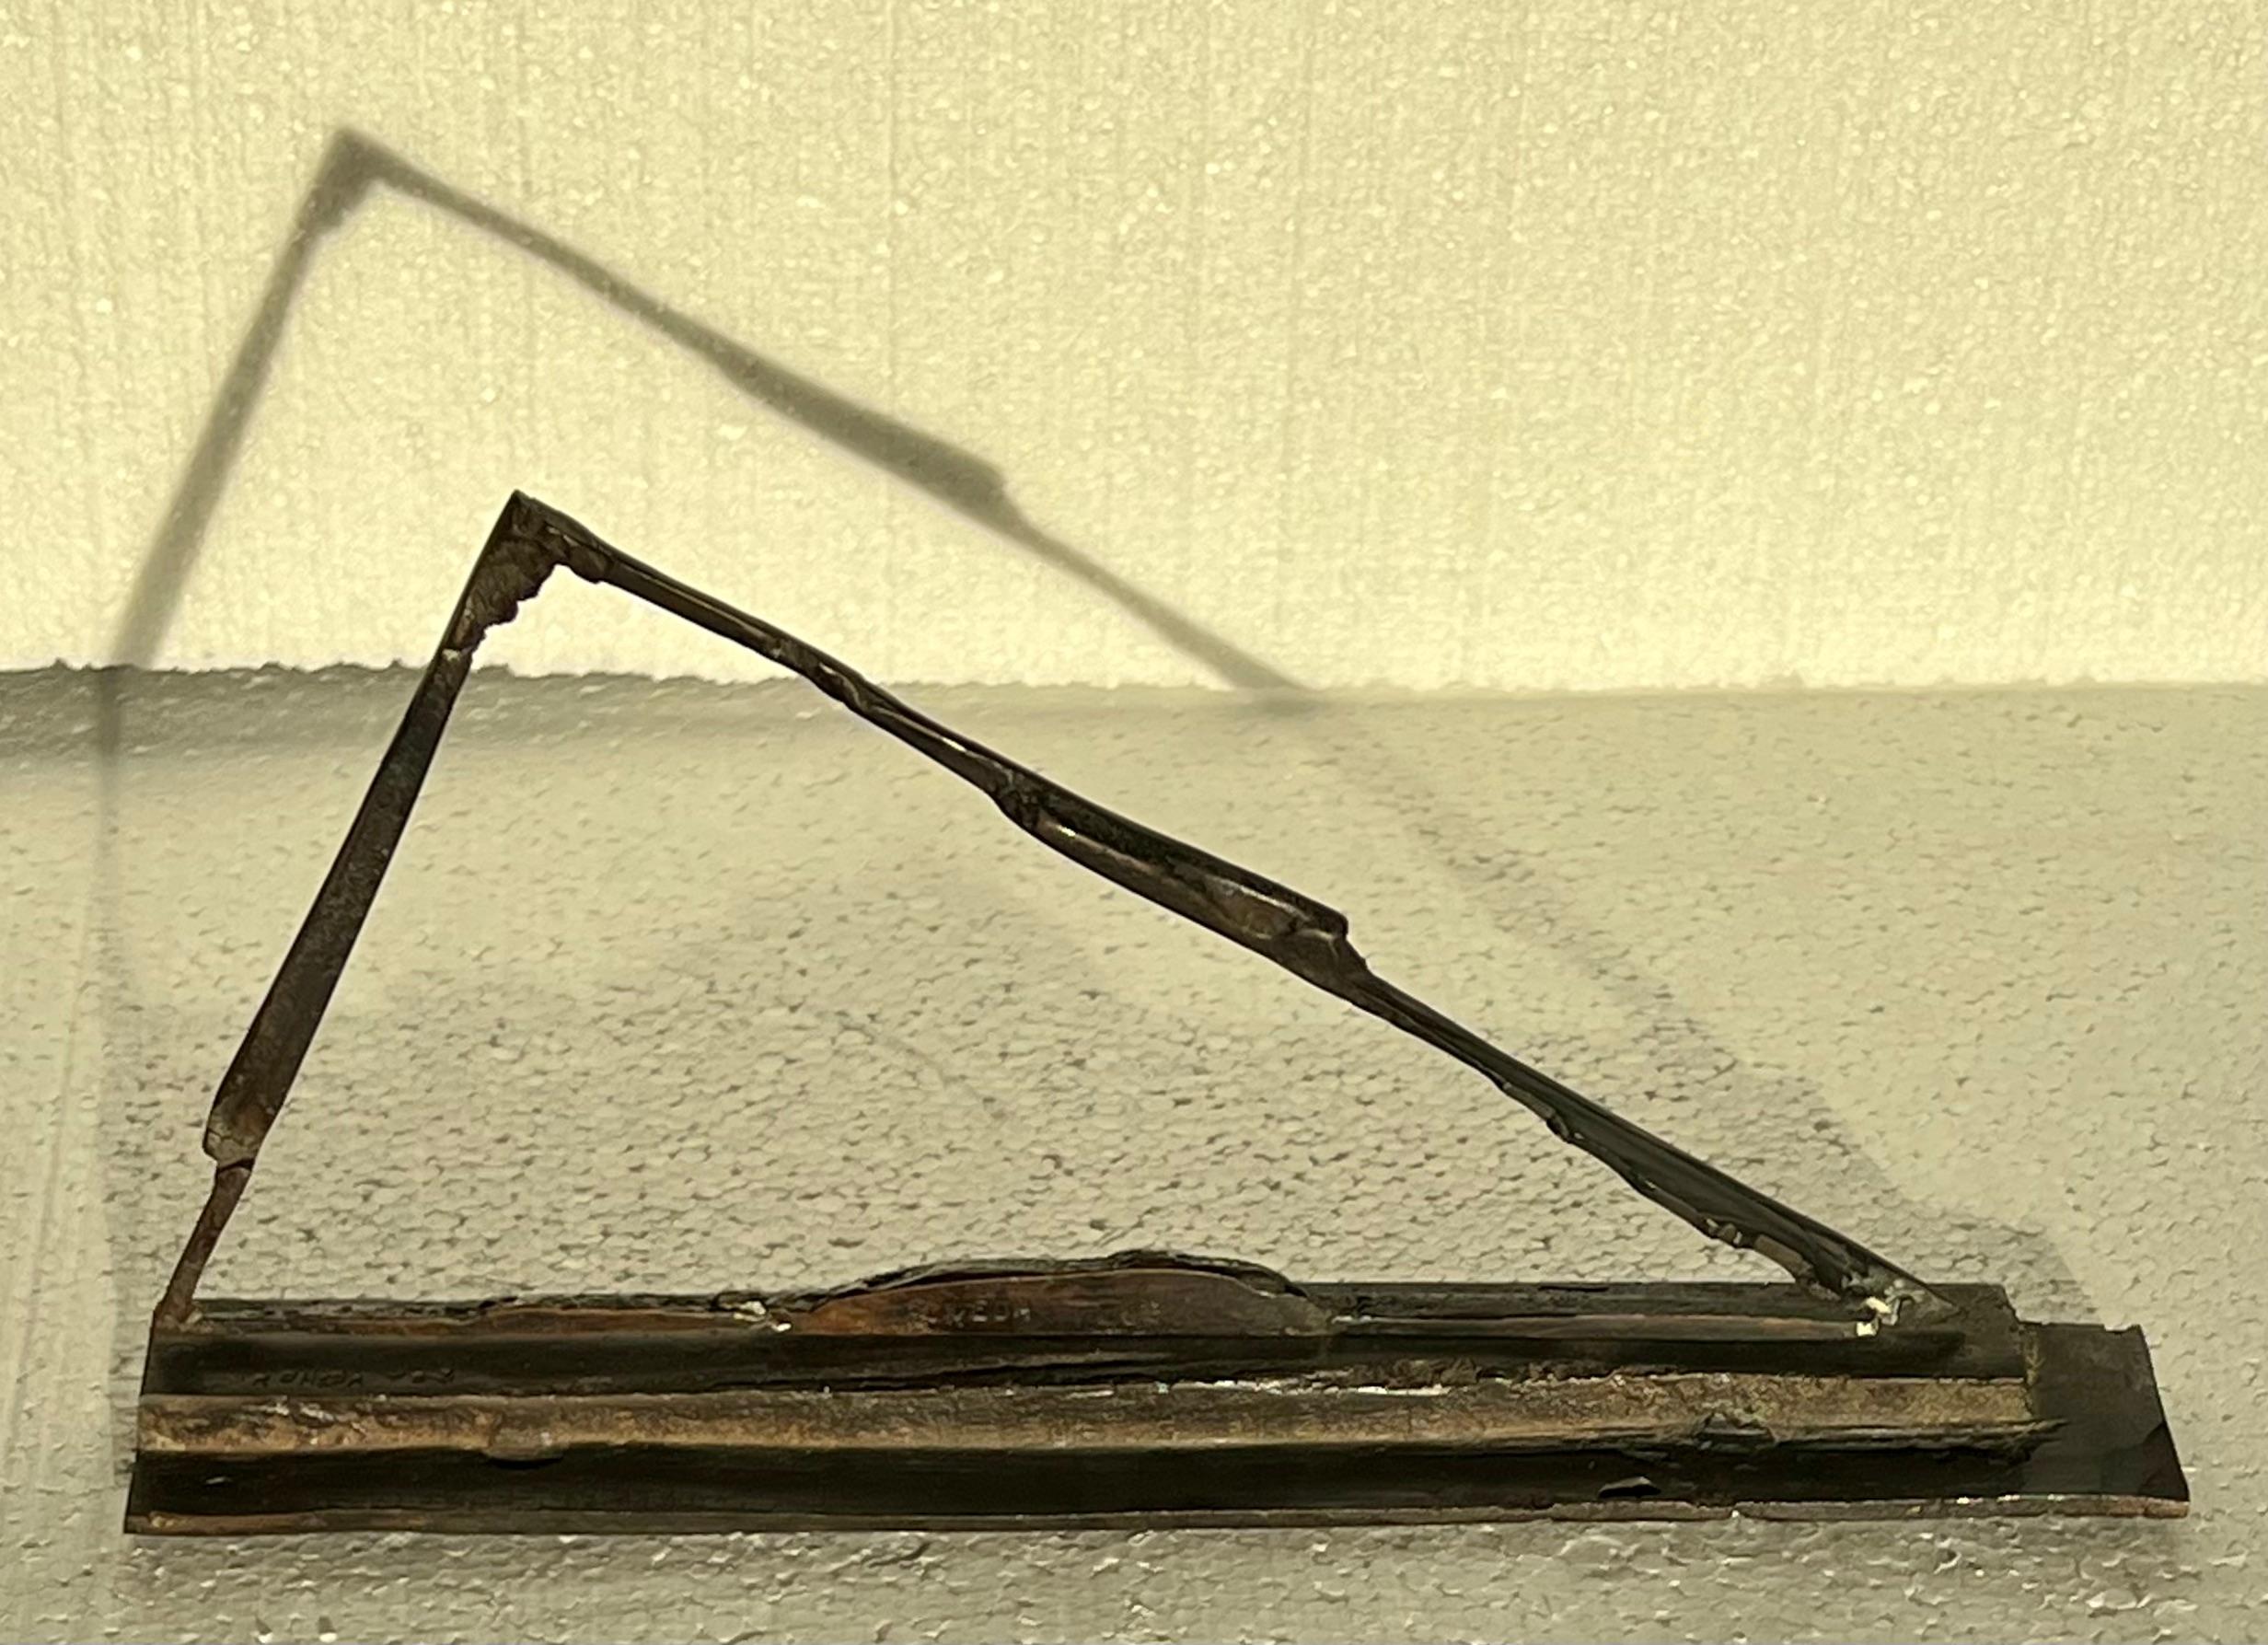 Contemporary Geometric Abstract Sculpture Bronze Unique Italian European 1983

Triangle, 1983, bronze.  6 x 12.25 x 2 inches. Signed and dated on both the sculpture and the base

BIO
Bruno Romeda is a complete artist because all his work always